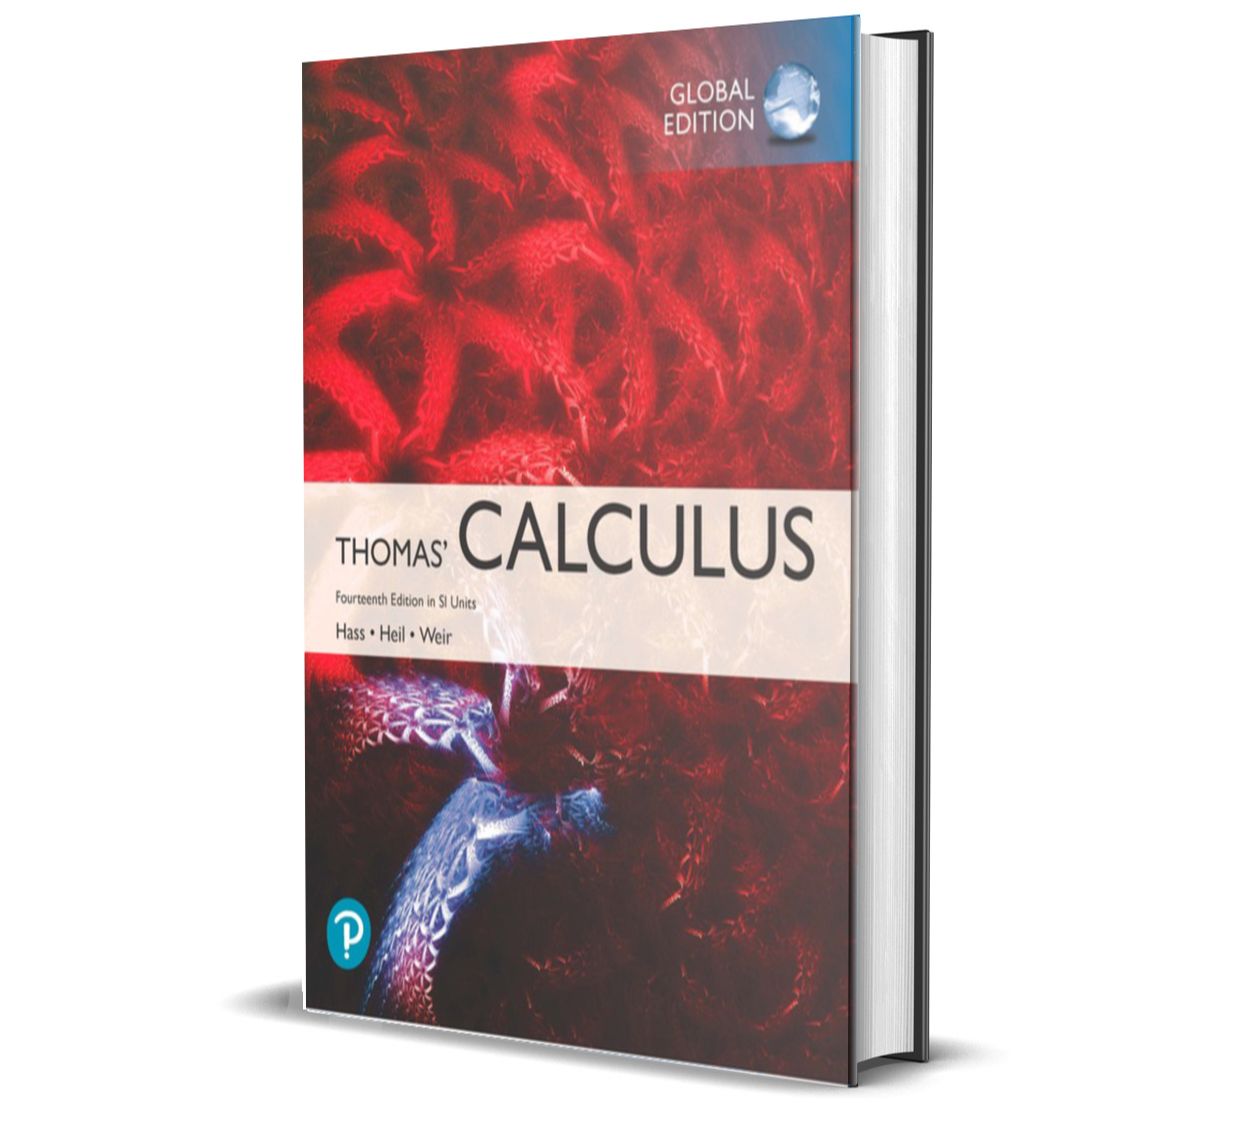 Paperback] Thomas' Calculus in SI Units, Global Edition, 14th